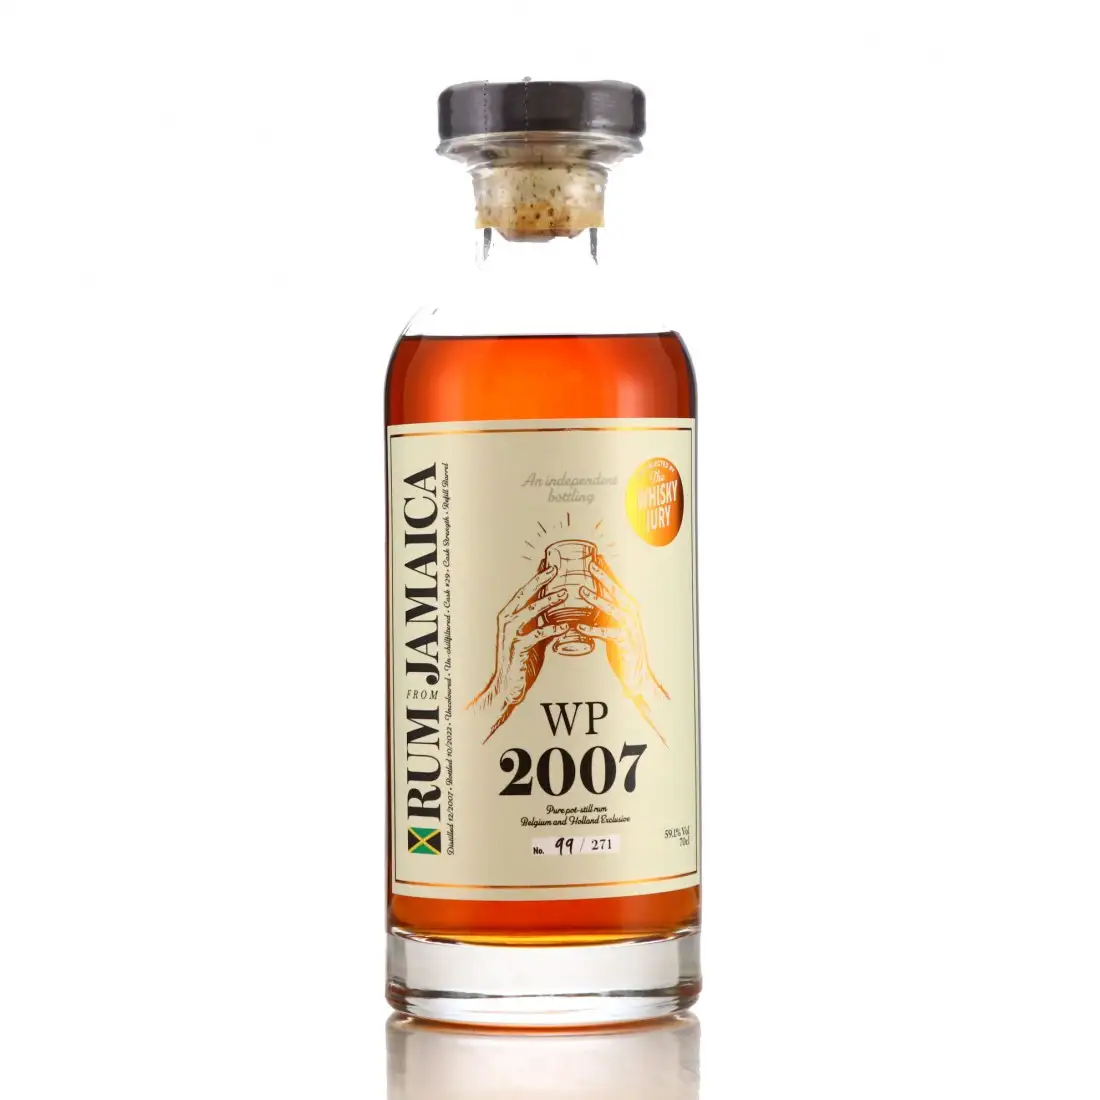 Image of the front of the bottle of the rum WP 2007